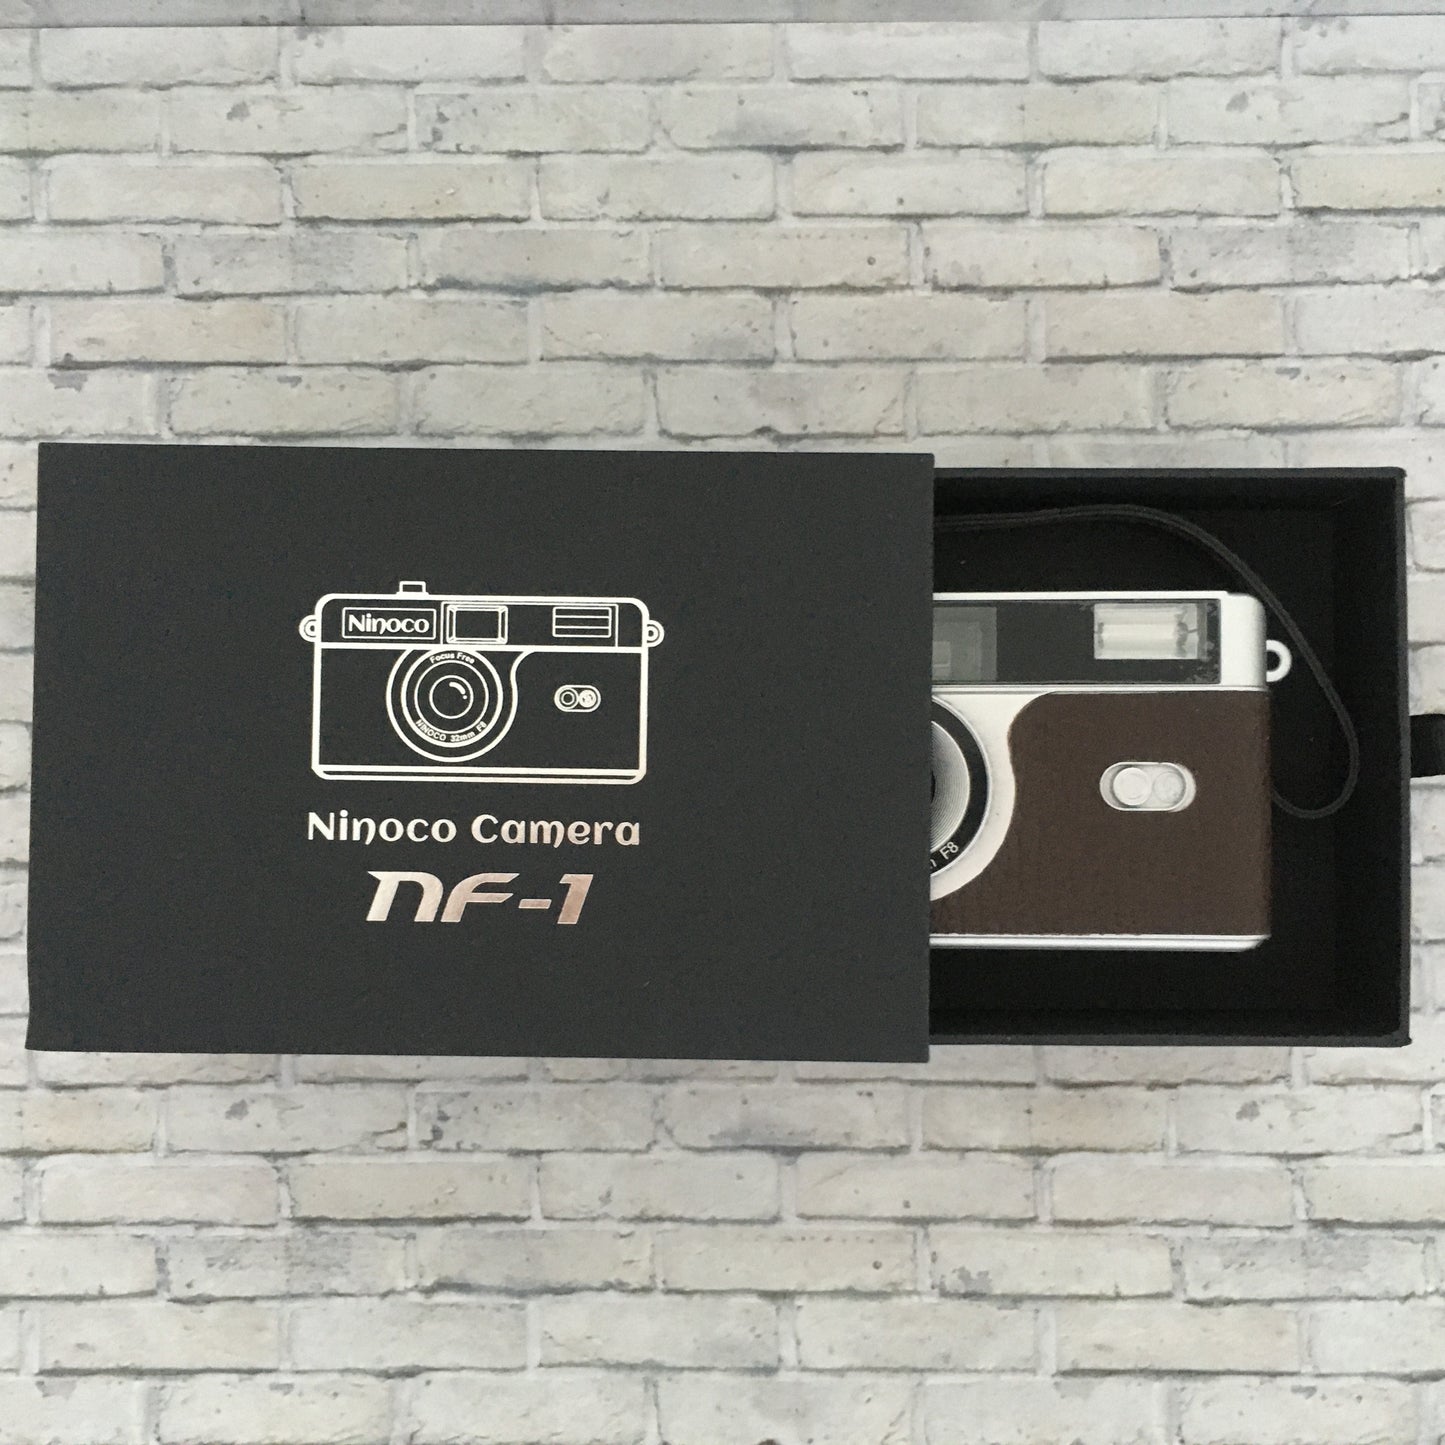 Point & shoot ! Brand new 35mm film camera with chocolate brown leather